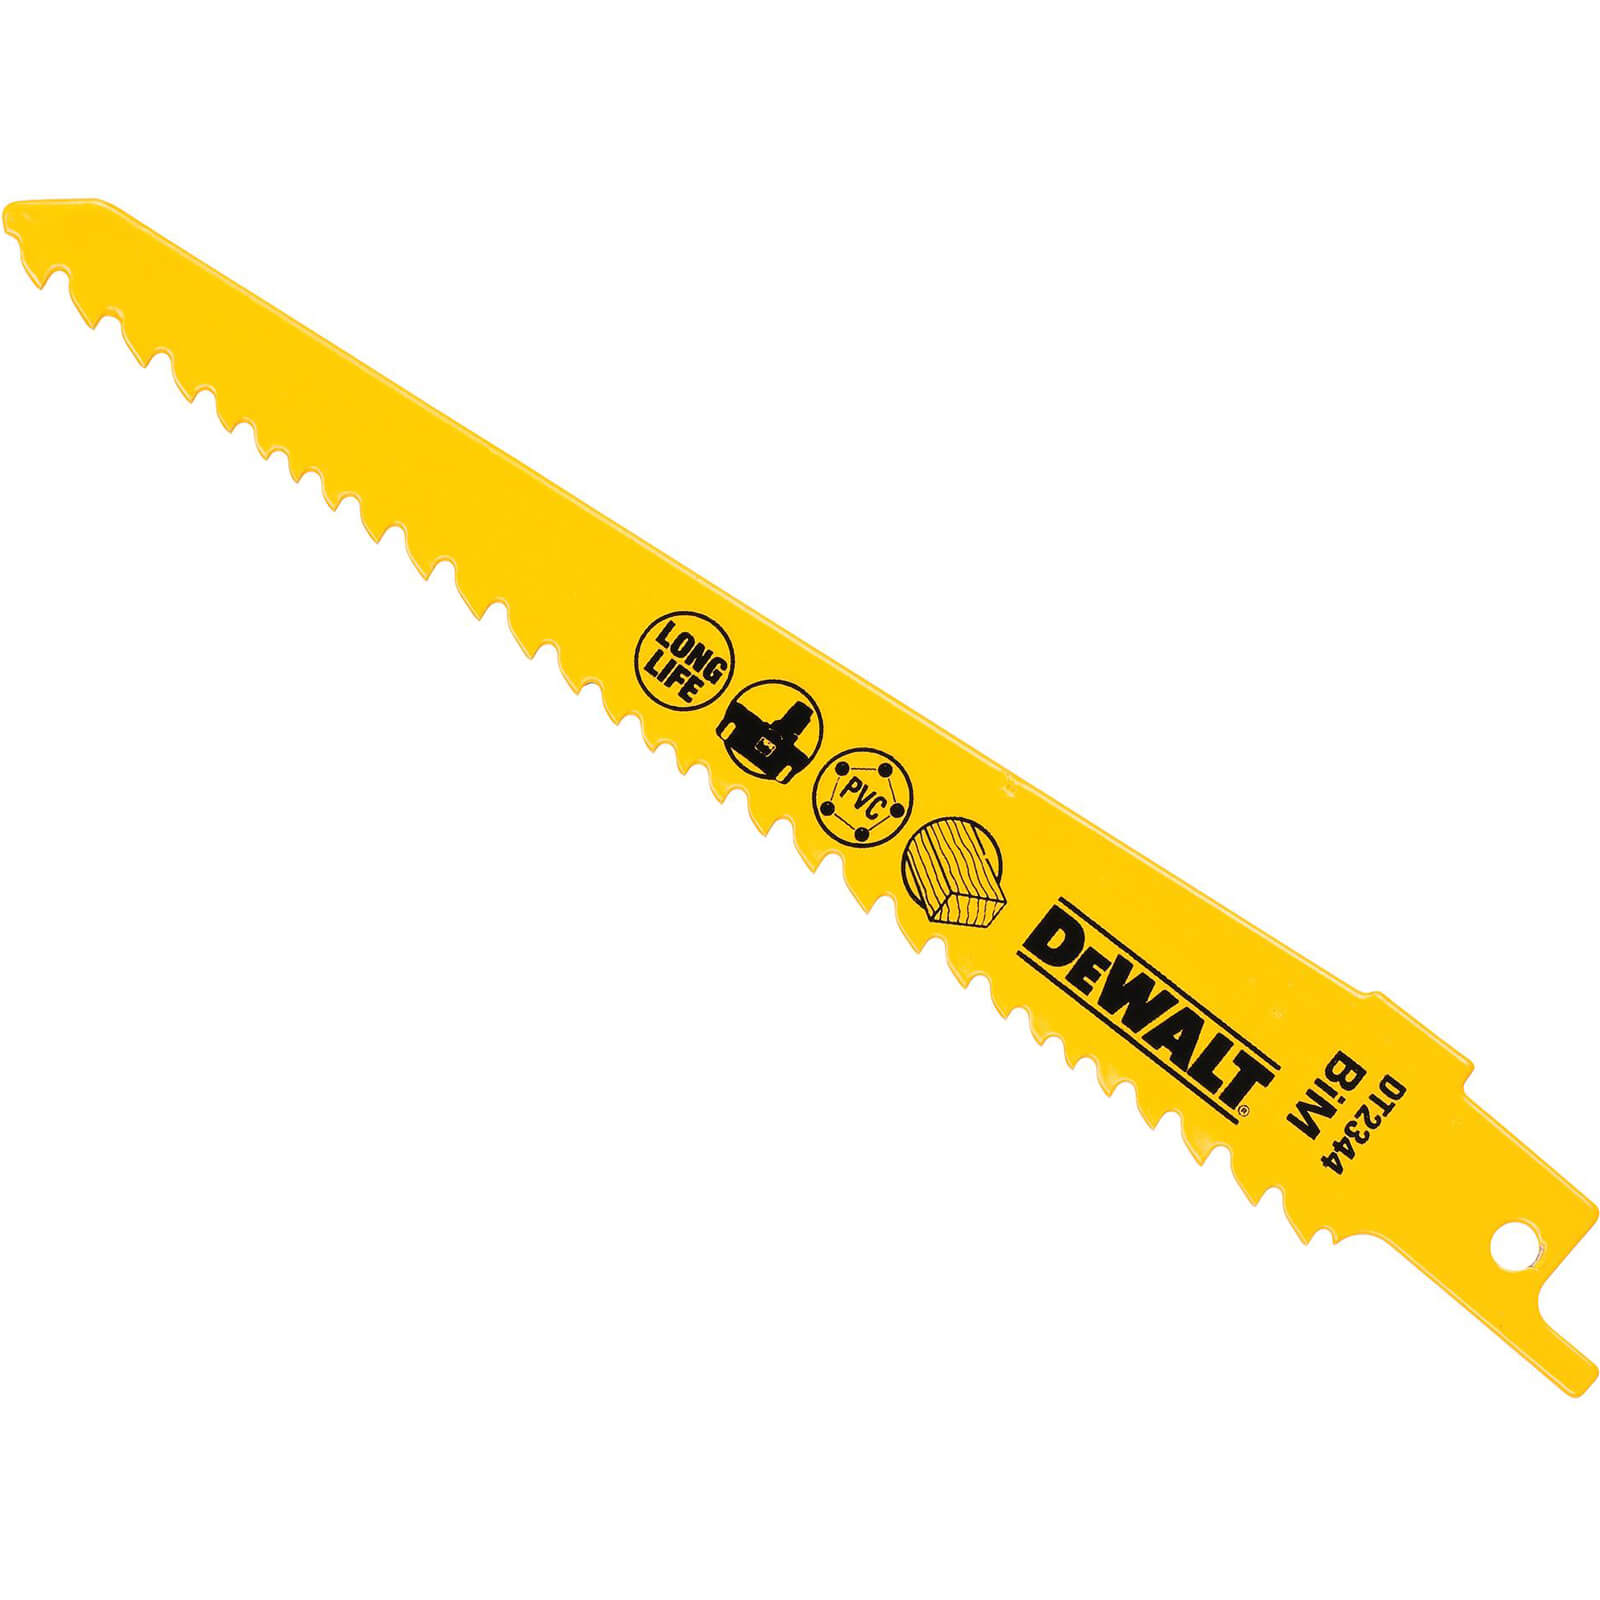 DeWalt BM Cordless Wood and Plastic Cutting Reciprocating Sabre Saw Blades 152mm Pack of 5